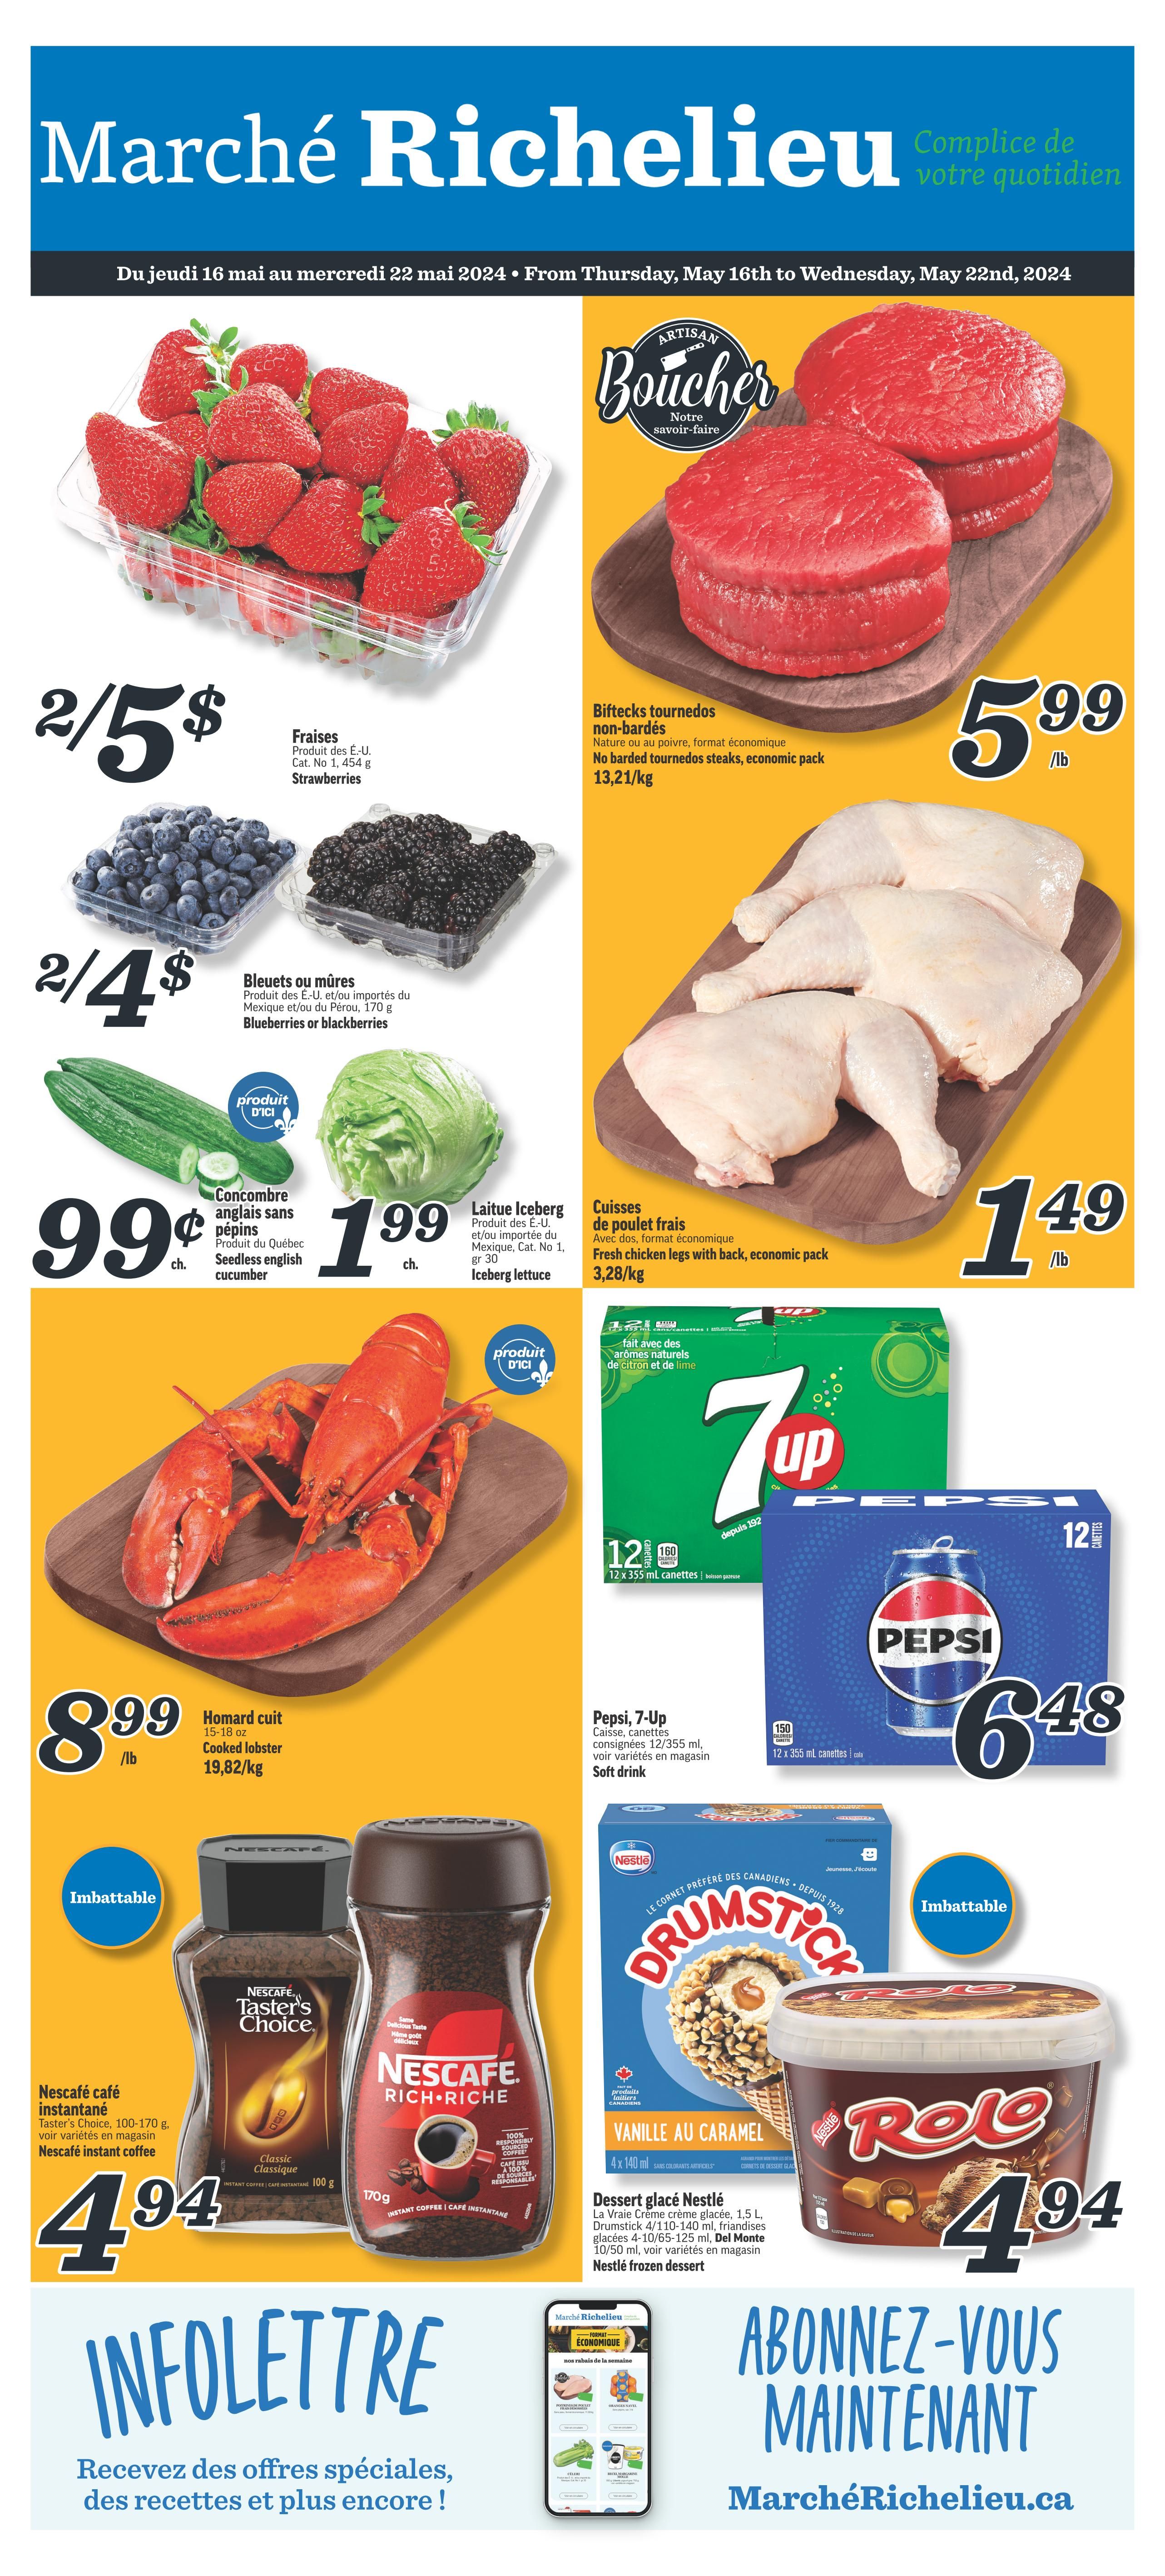 Marché Richelieu - Weekly Flyer Specials